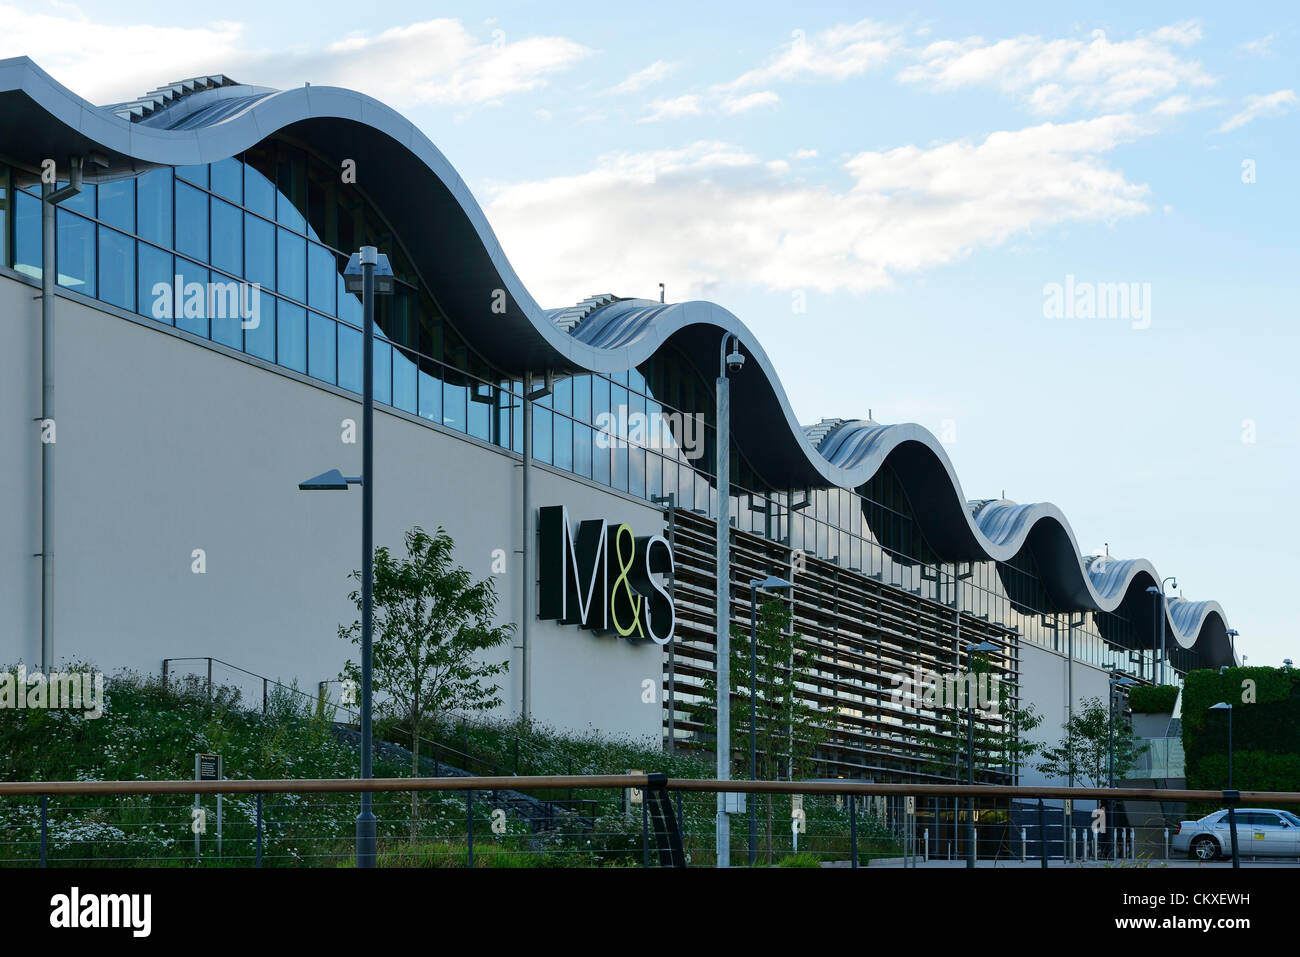 The flagship Marks & Spencer Store at Cheshire Oaks, Cheshire, UK which opens to the public at 10am Wednesday 29th August 2012. It will be opened by Chief Executive Marc Bolland together with Joanna Lumley. Stock Photo